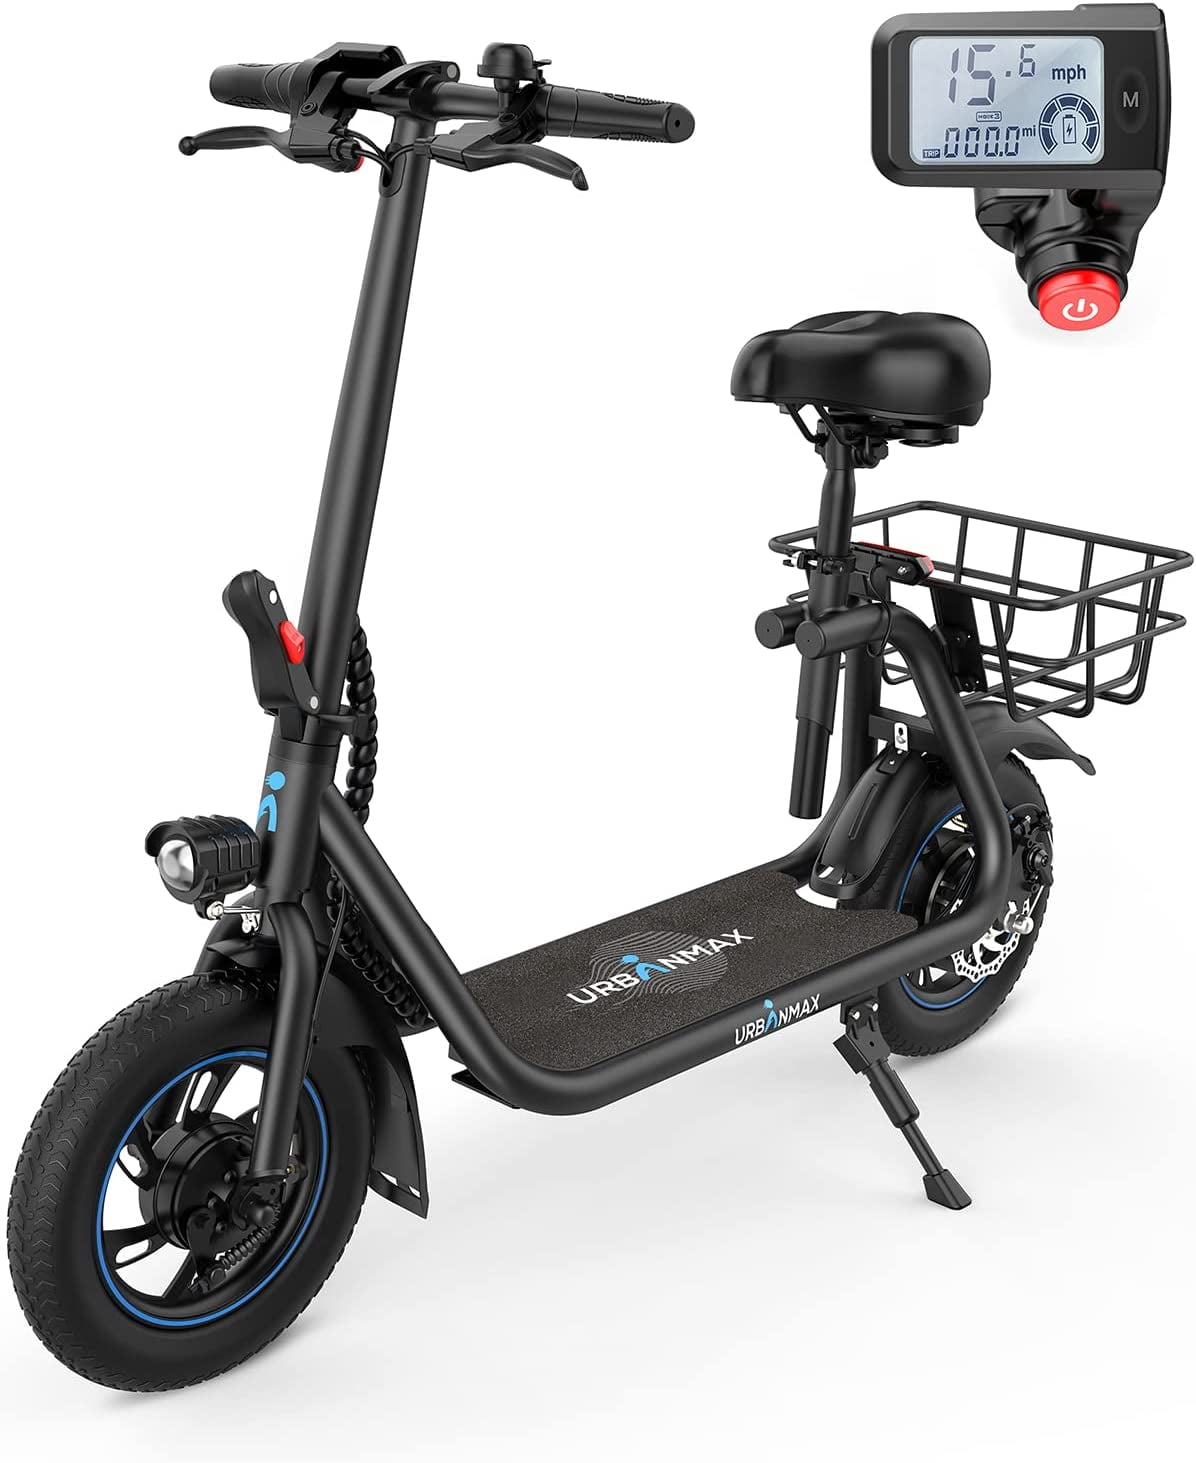 URBANMAX Electric Scooter with Seat, 450W Powerful Motor up to 22 Miles Range, Folding Electric Scooter for Adult Max Speed 15.5Mph, Scooter for with Basket Walmart.com